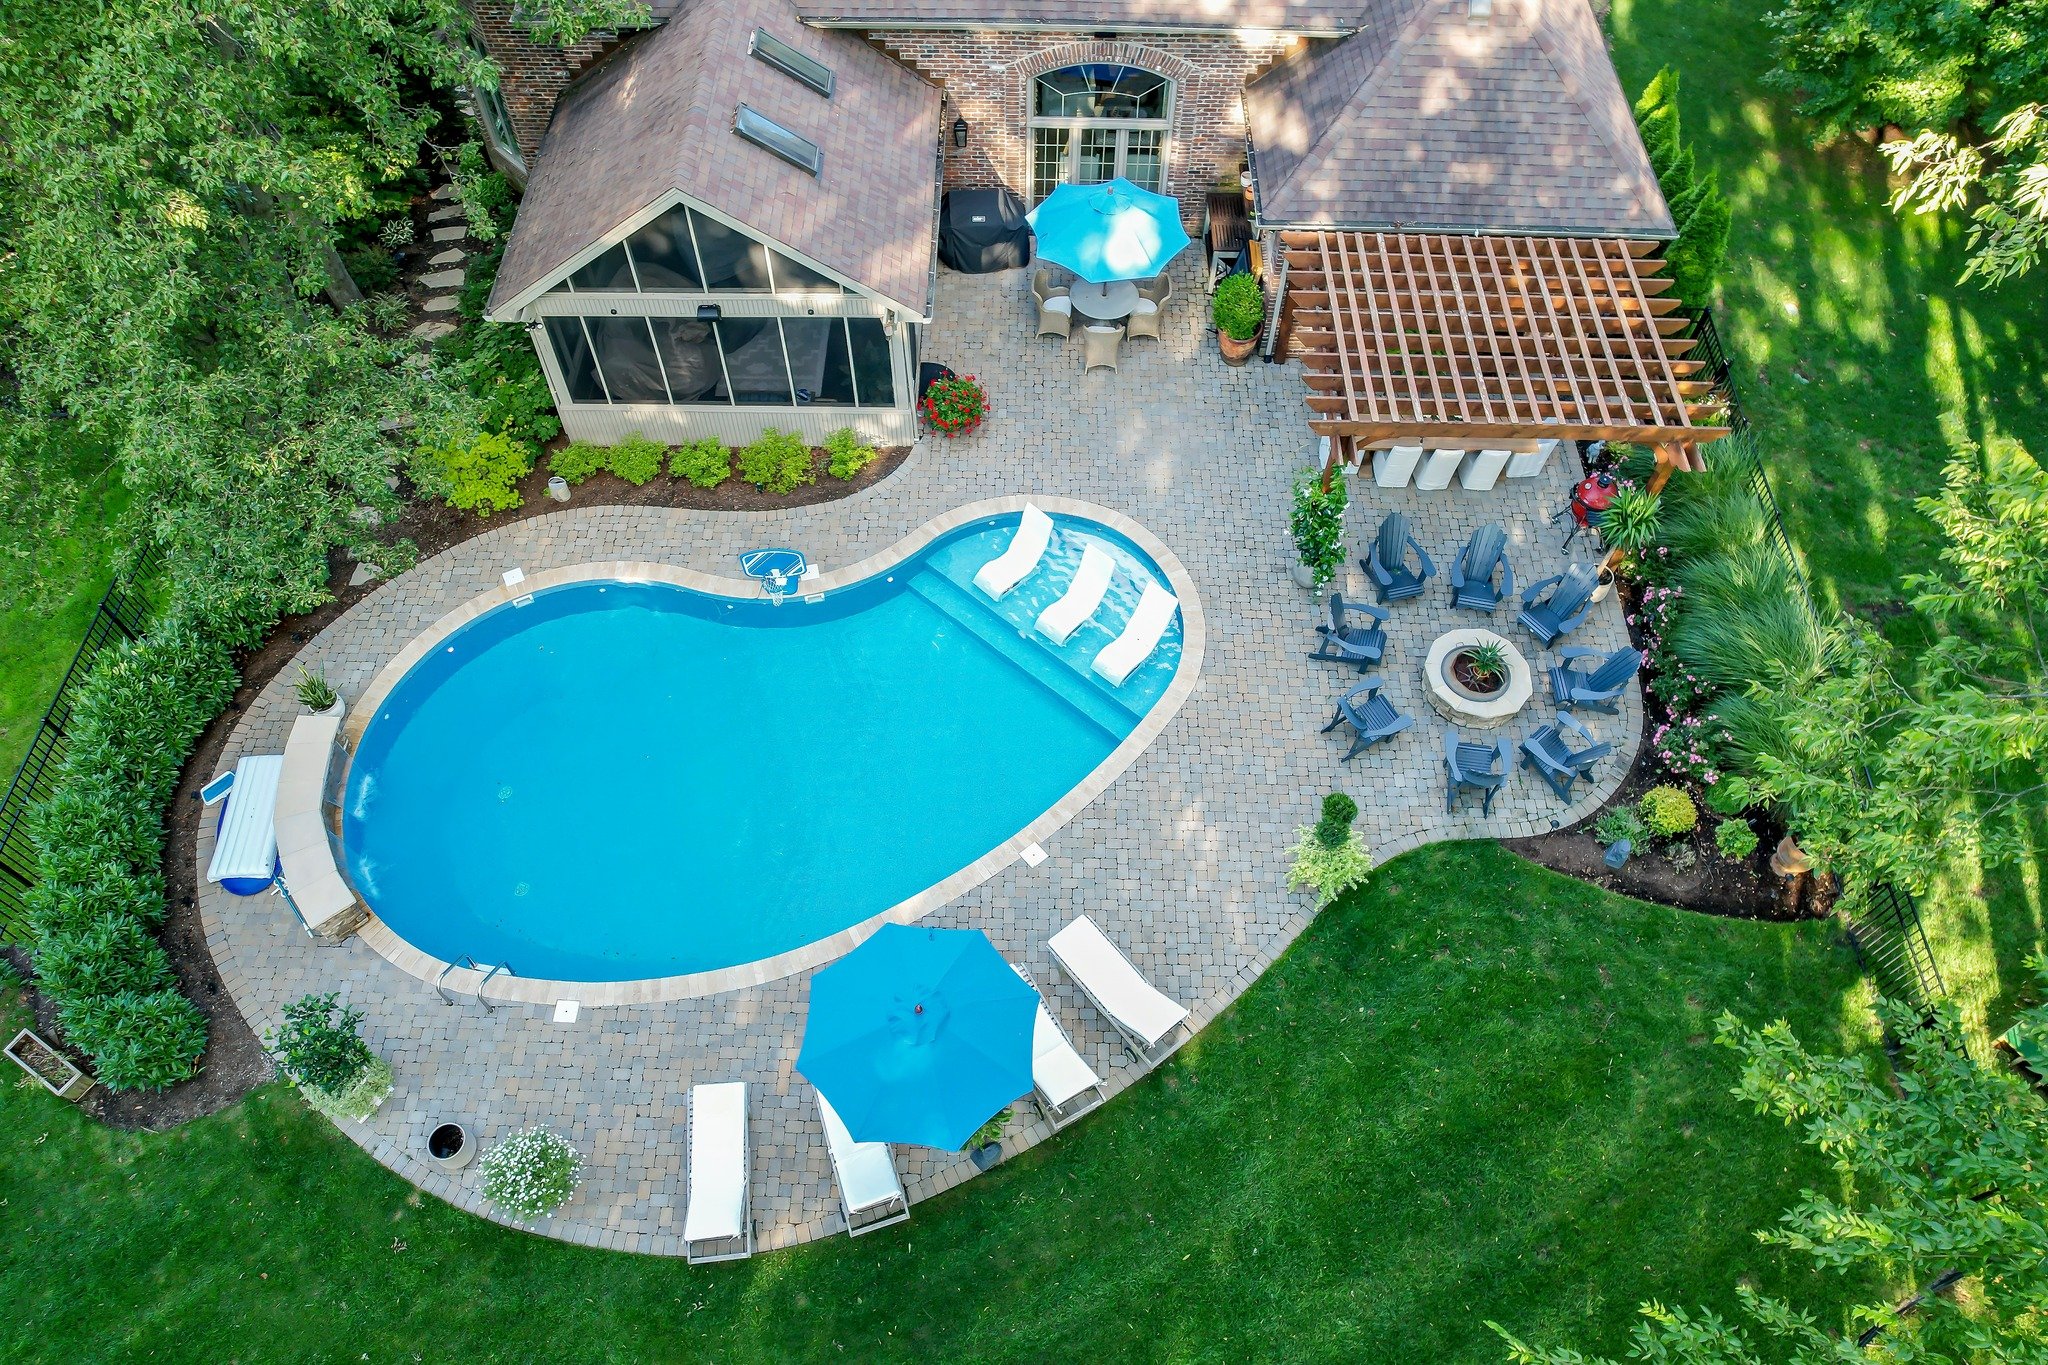 Is your outdoor living space staycation ready?!?! We would love to work with you to make your dream space a reality :) 

#backyardpool 
#swimmingpool 
#kidshomeforthesummer 
#OutdoorLiving 
#outdoordesign 
#backyarddesign 
#landscapearchitect 
#bestg